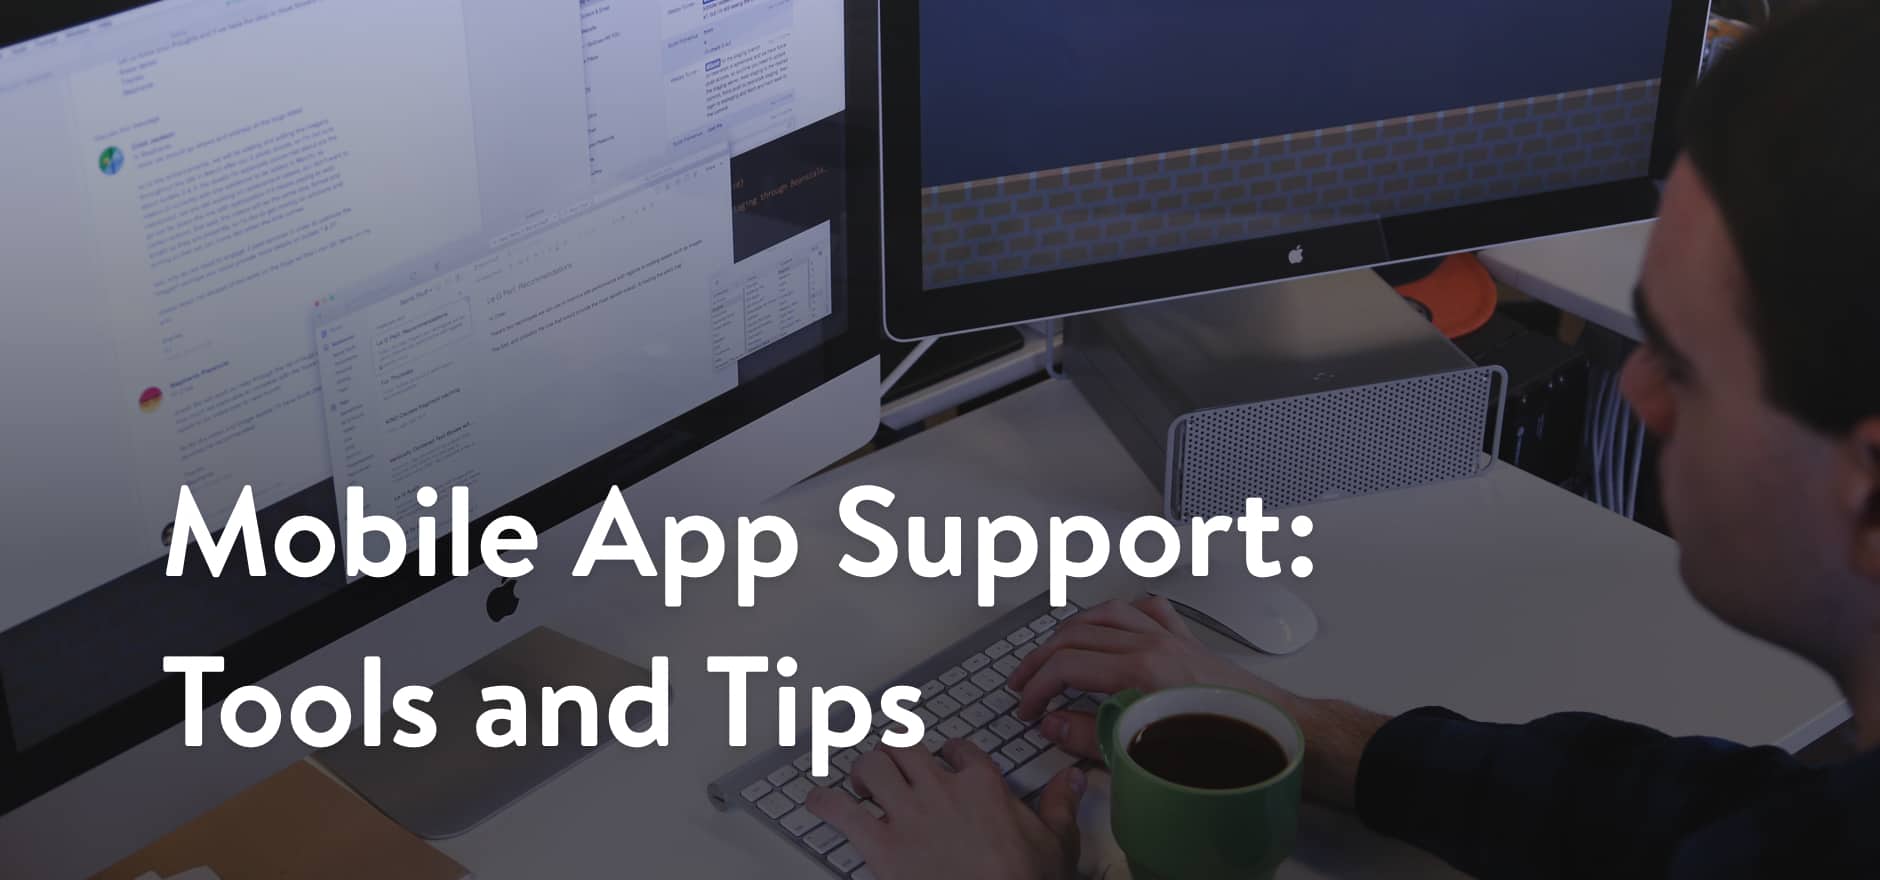 Mobile App Support: Tools and Tips